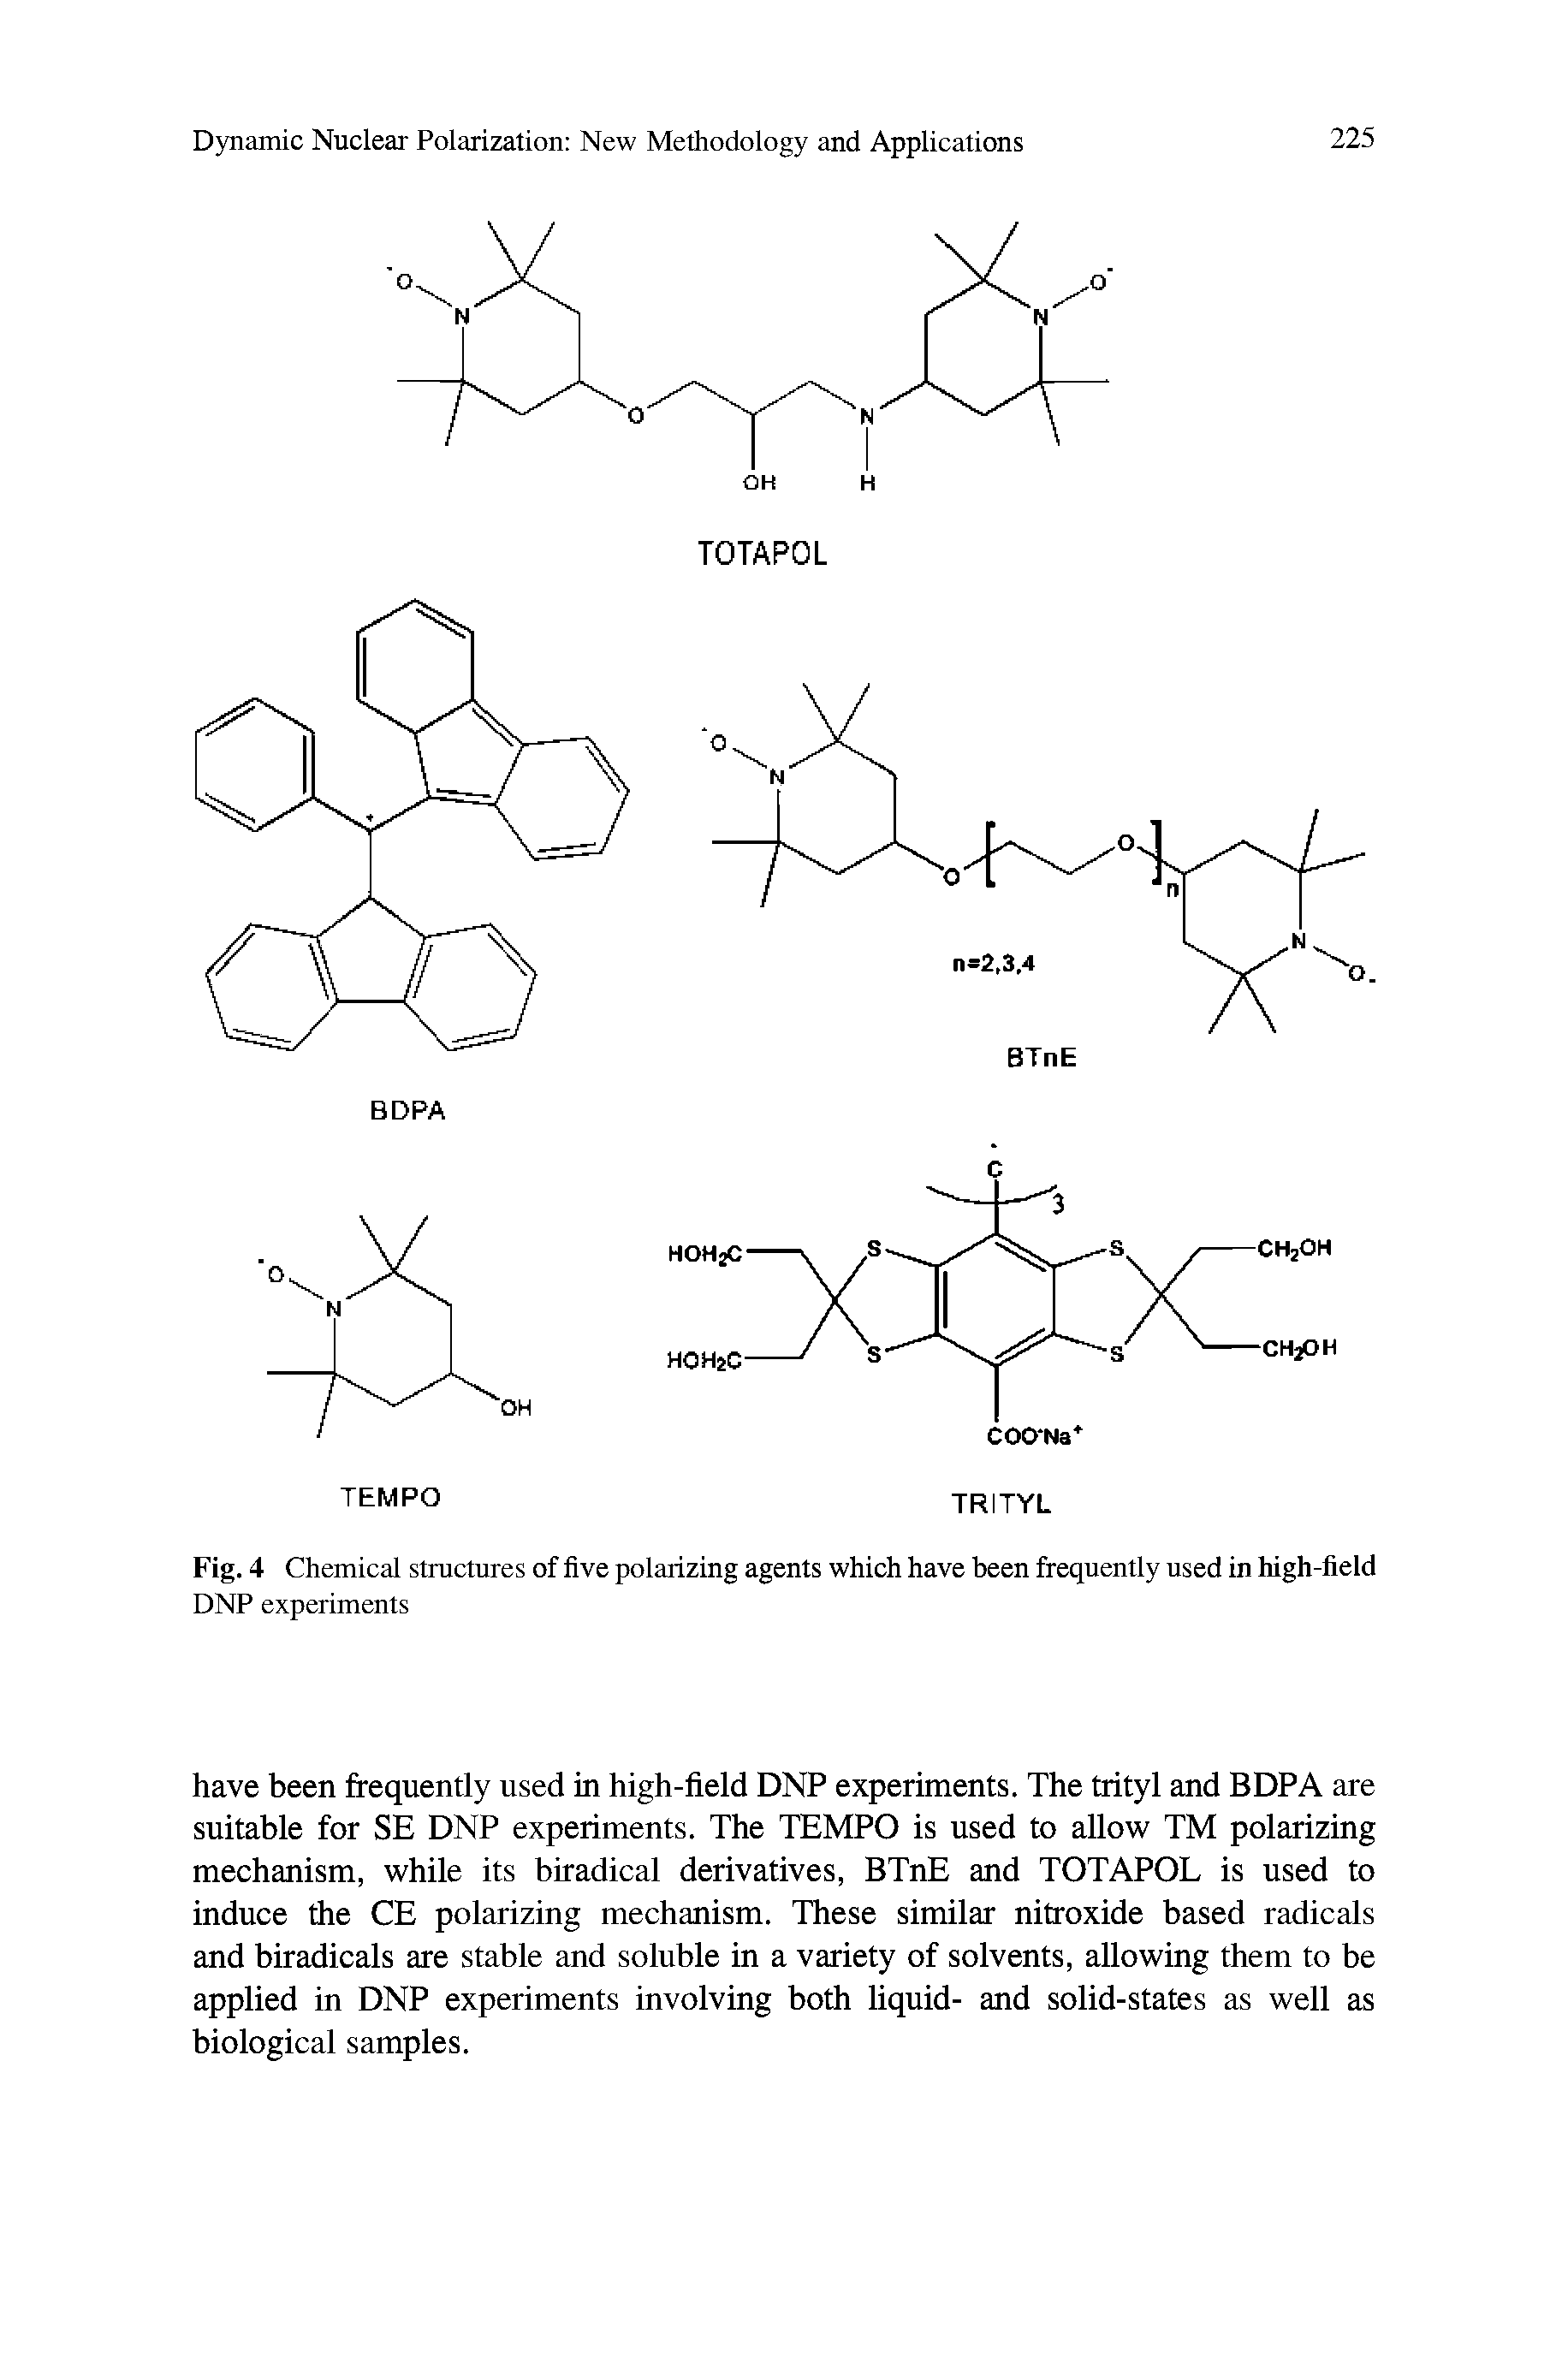 Fig. 4 Chemical structures of five polarizing agents which have been frequently used in high-field DNP experiments...